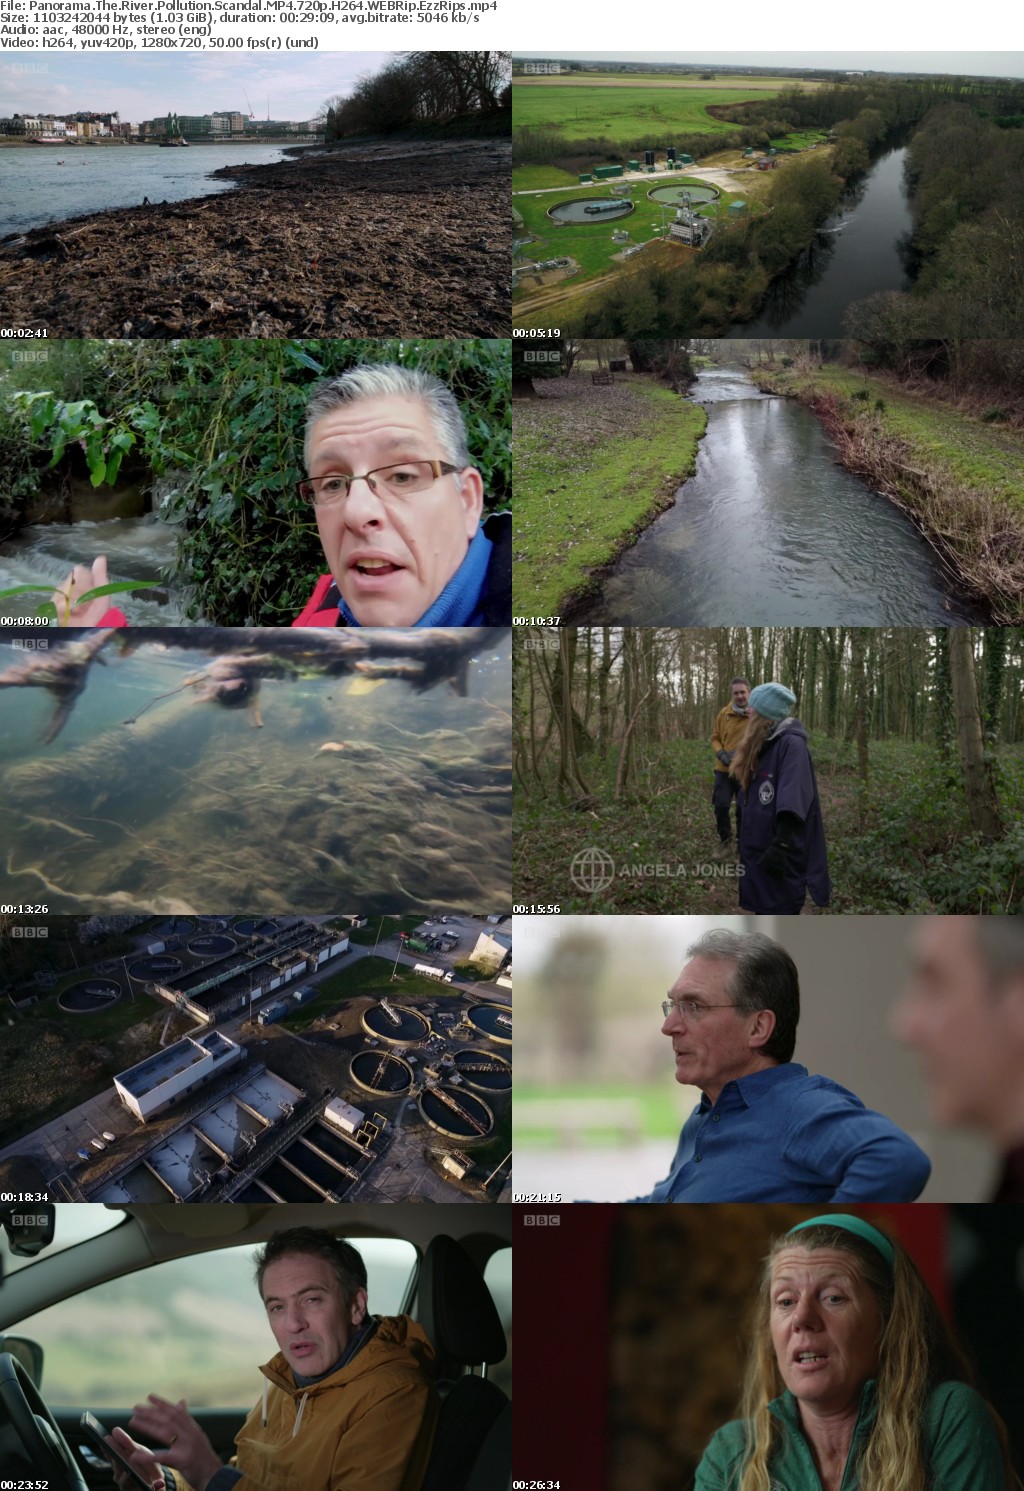 Panorama The River Pollution Scandal MP4 720p H264 WEBRip EzzRips